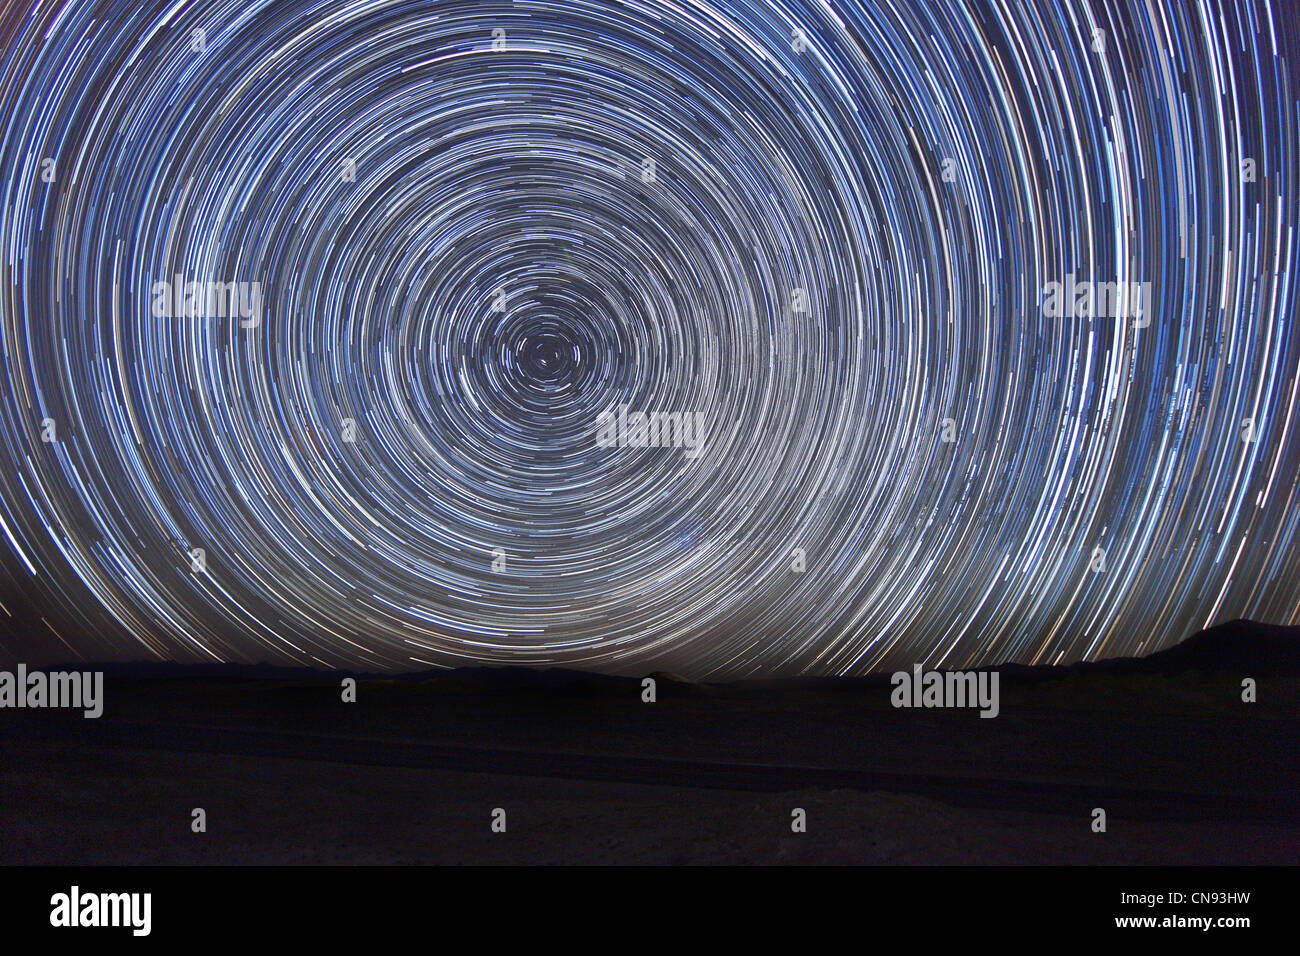 Long Exposure Time Lapse Image of the Night Stars Stock Photo